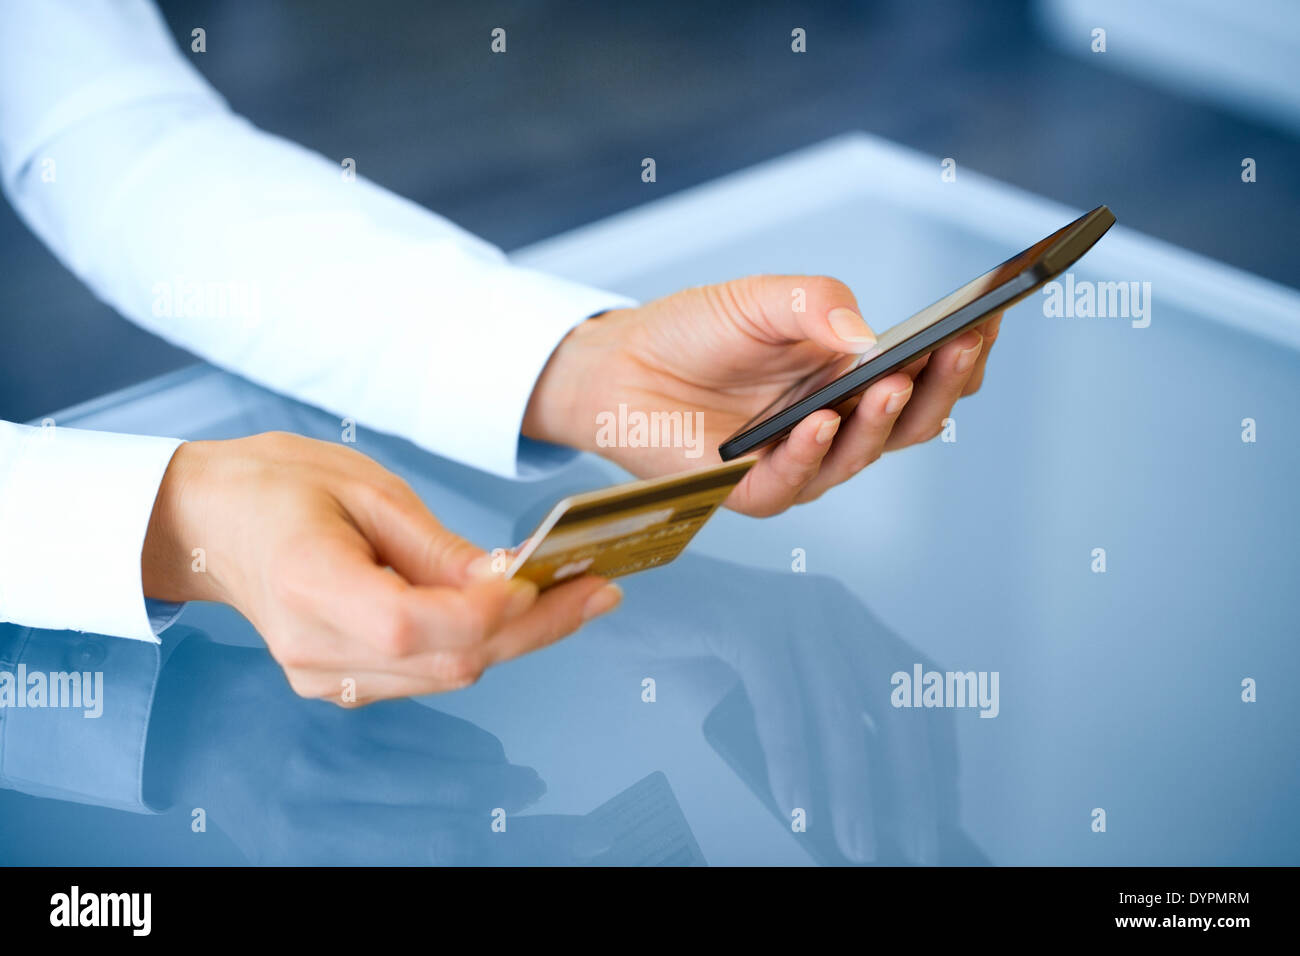 Woman shopping online using mobile phone and credit card .indoor.close-up Stock Photo